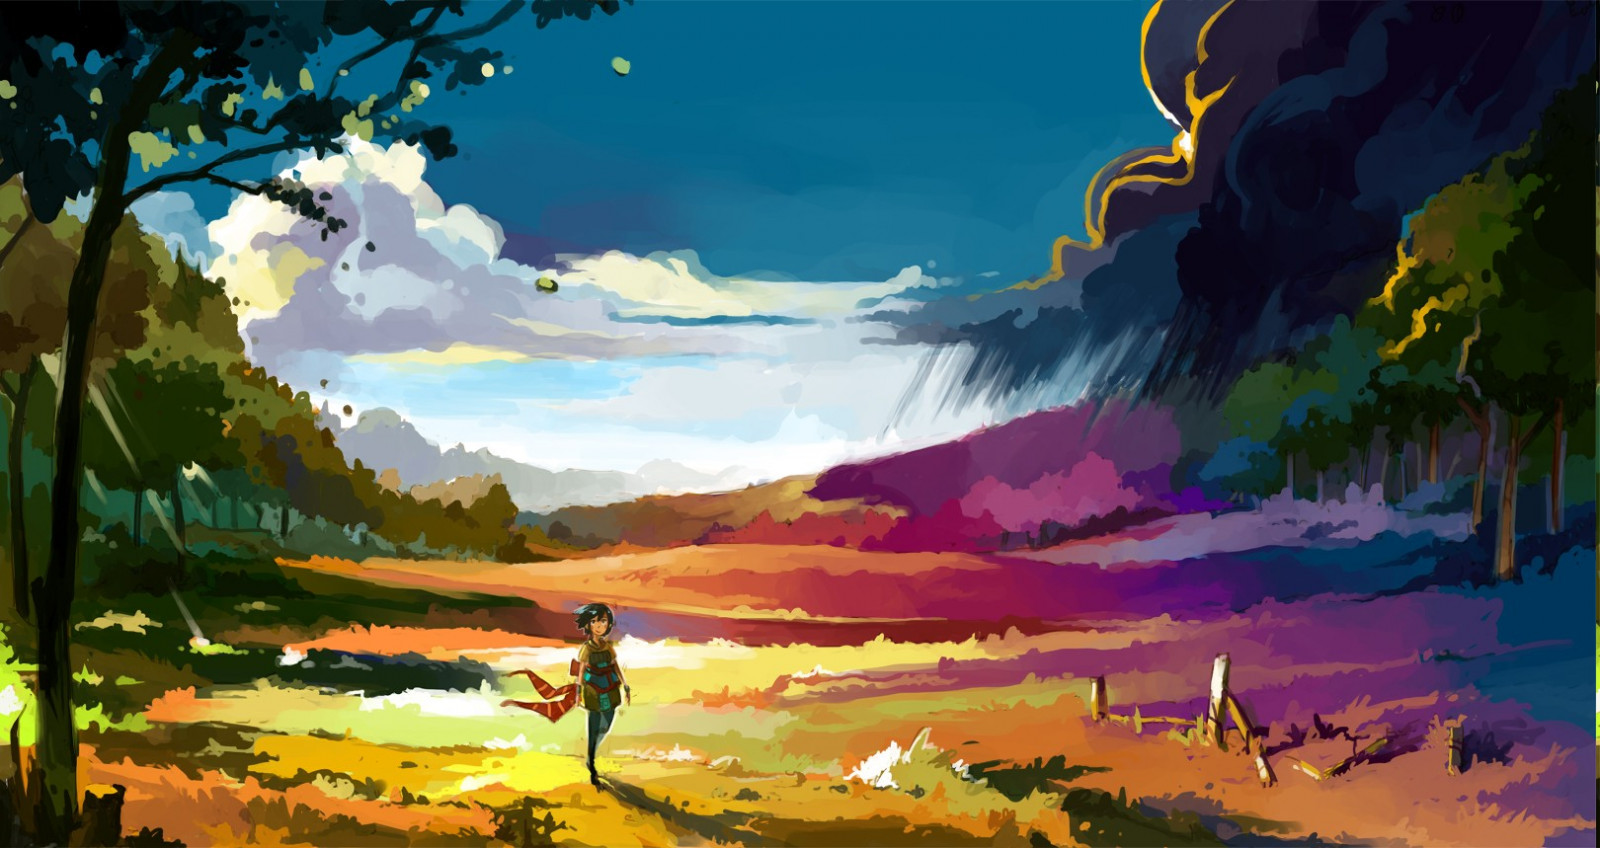 Wallpaper, landscape, colorful, painting, illustration, anime, nature, grass, sky, artwork, mount scenery, ART, tree, mountain, meadow, computer wallpaper, ecosystem, acrylic paint, watercolor paint, ecoregion, 1620x859 px, visual arts, theatrical